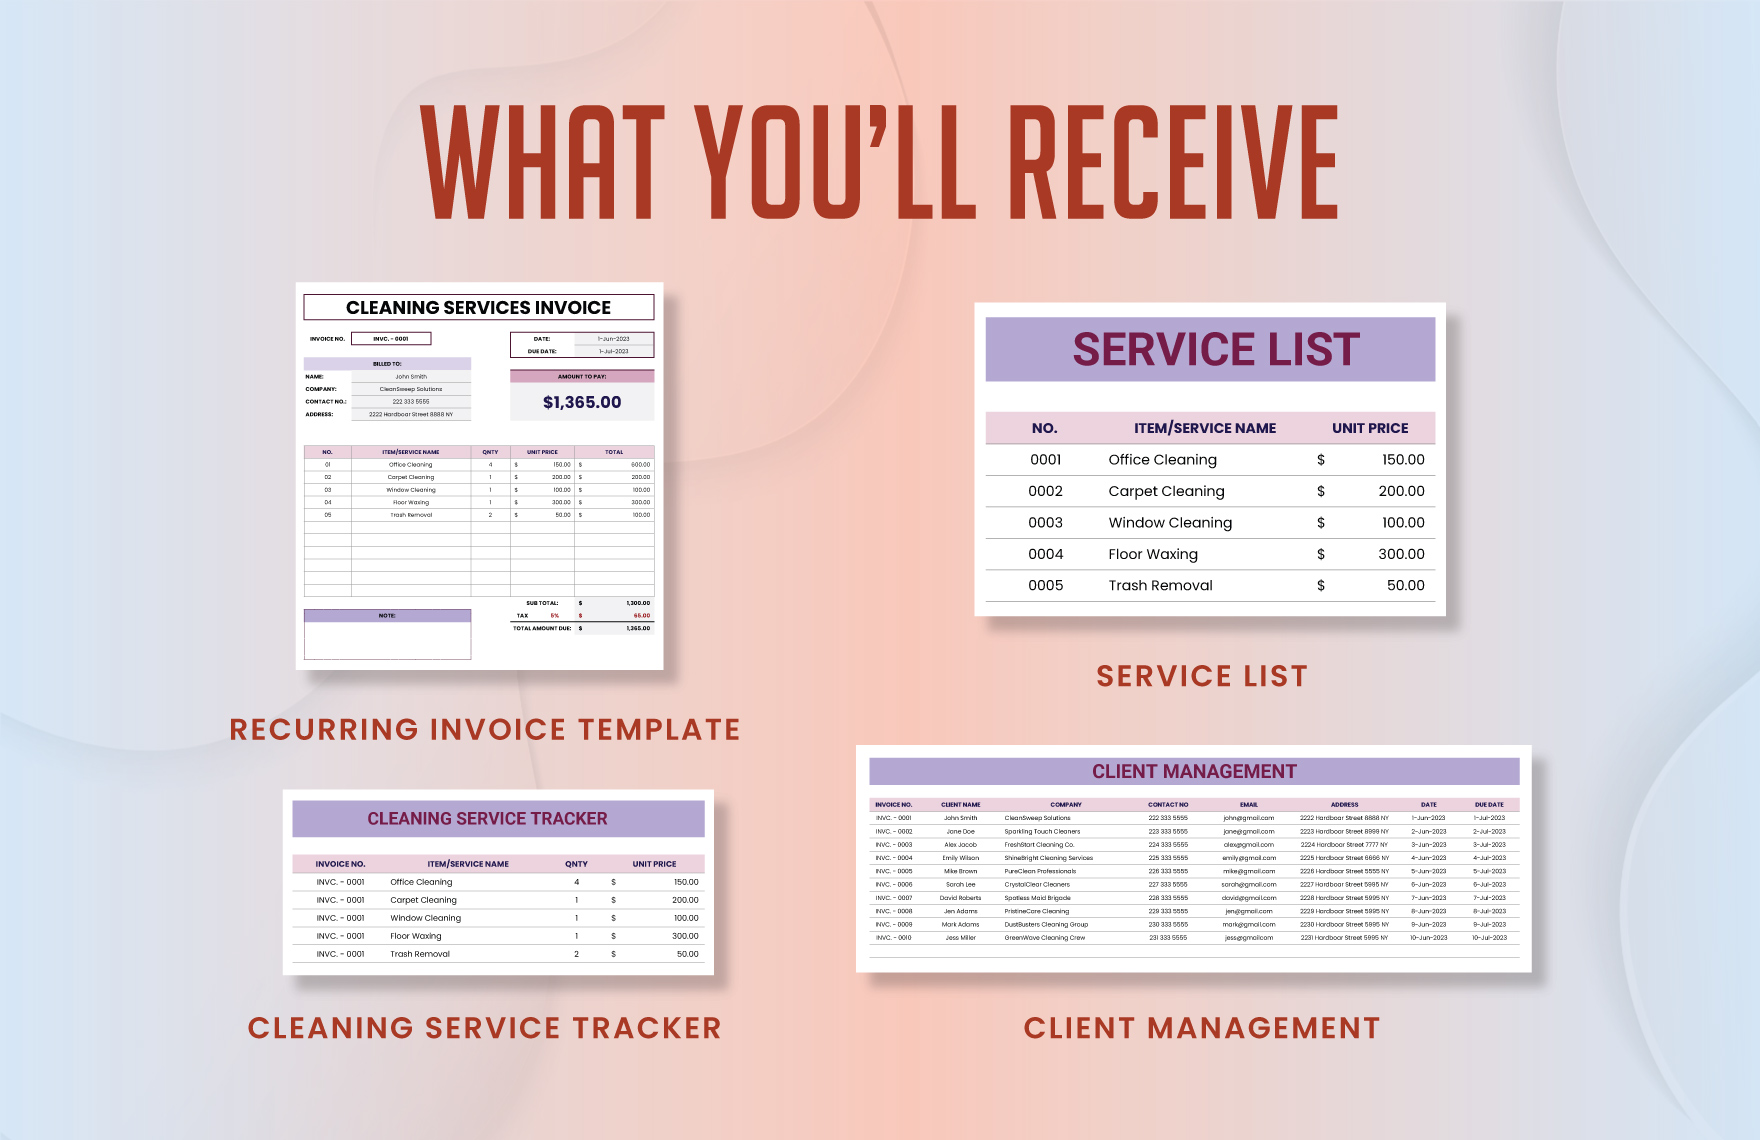 Cleaning Services Invoice Template